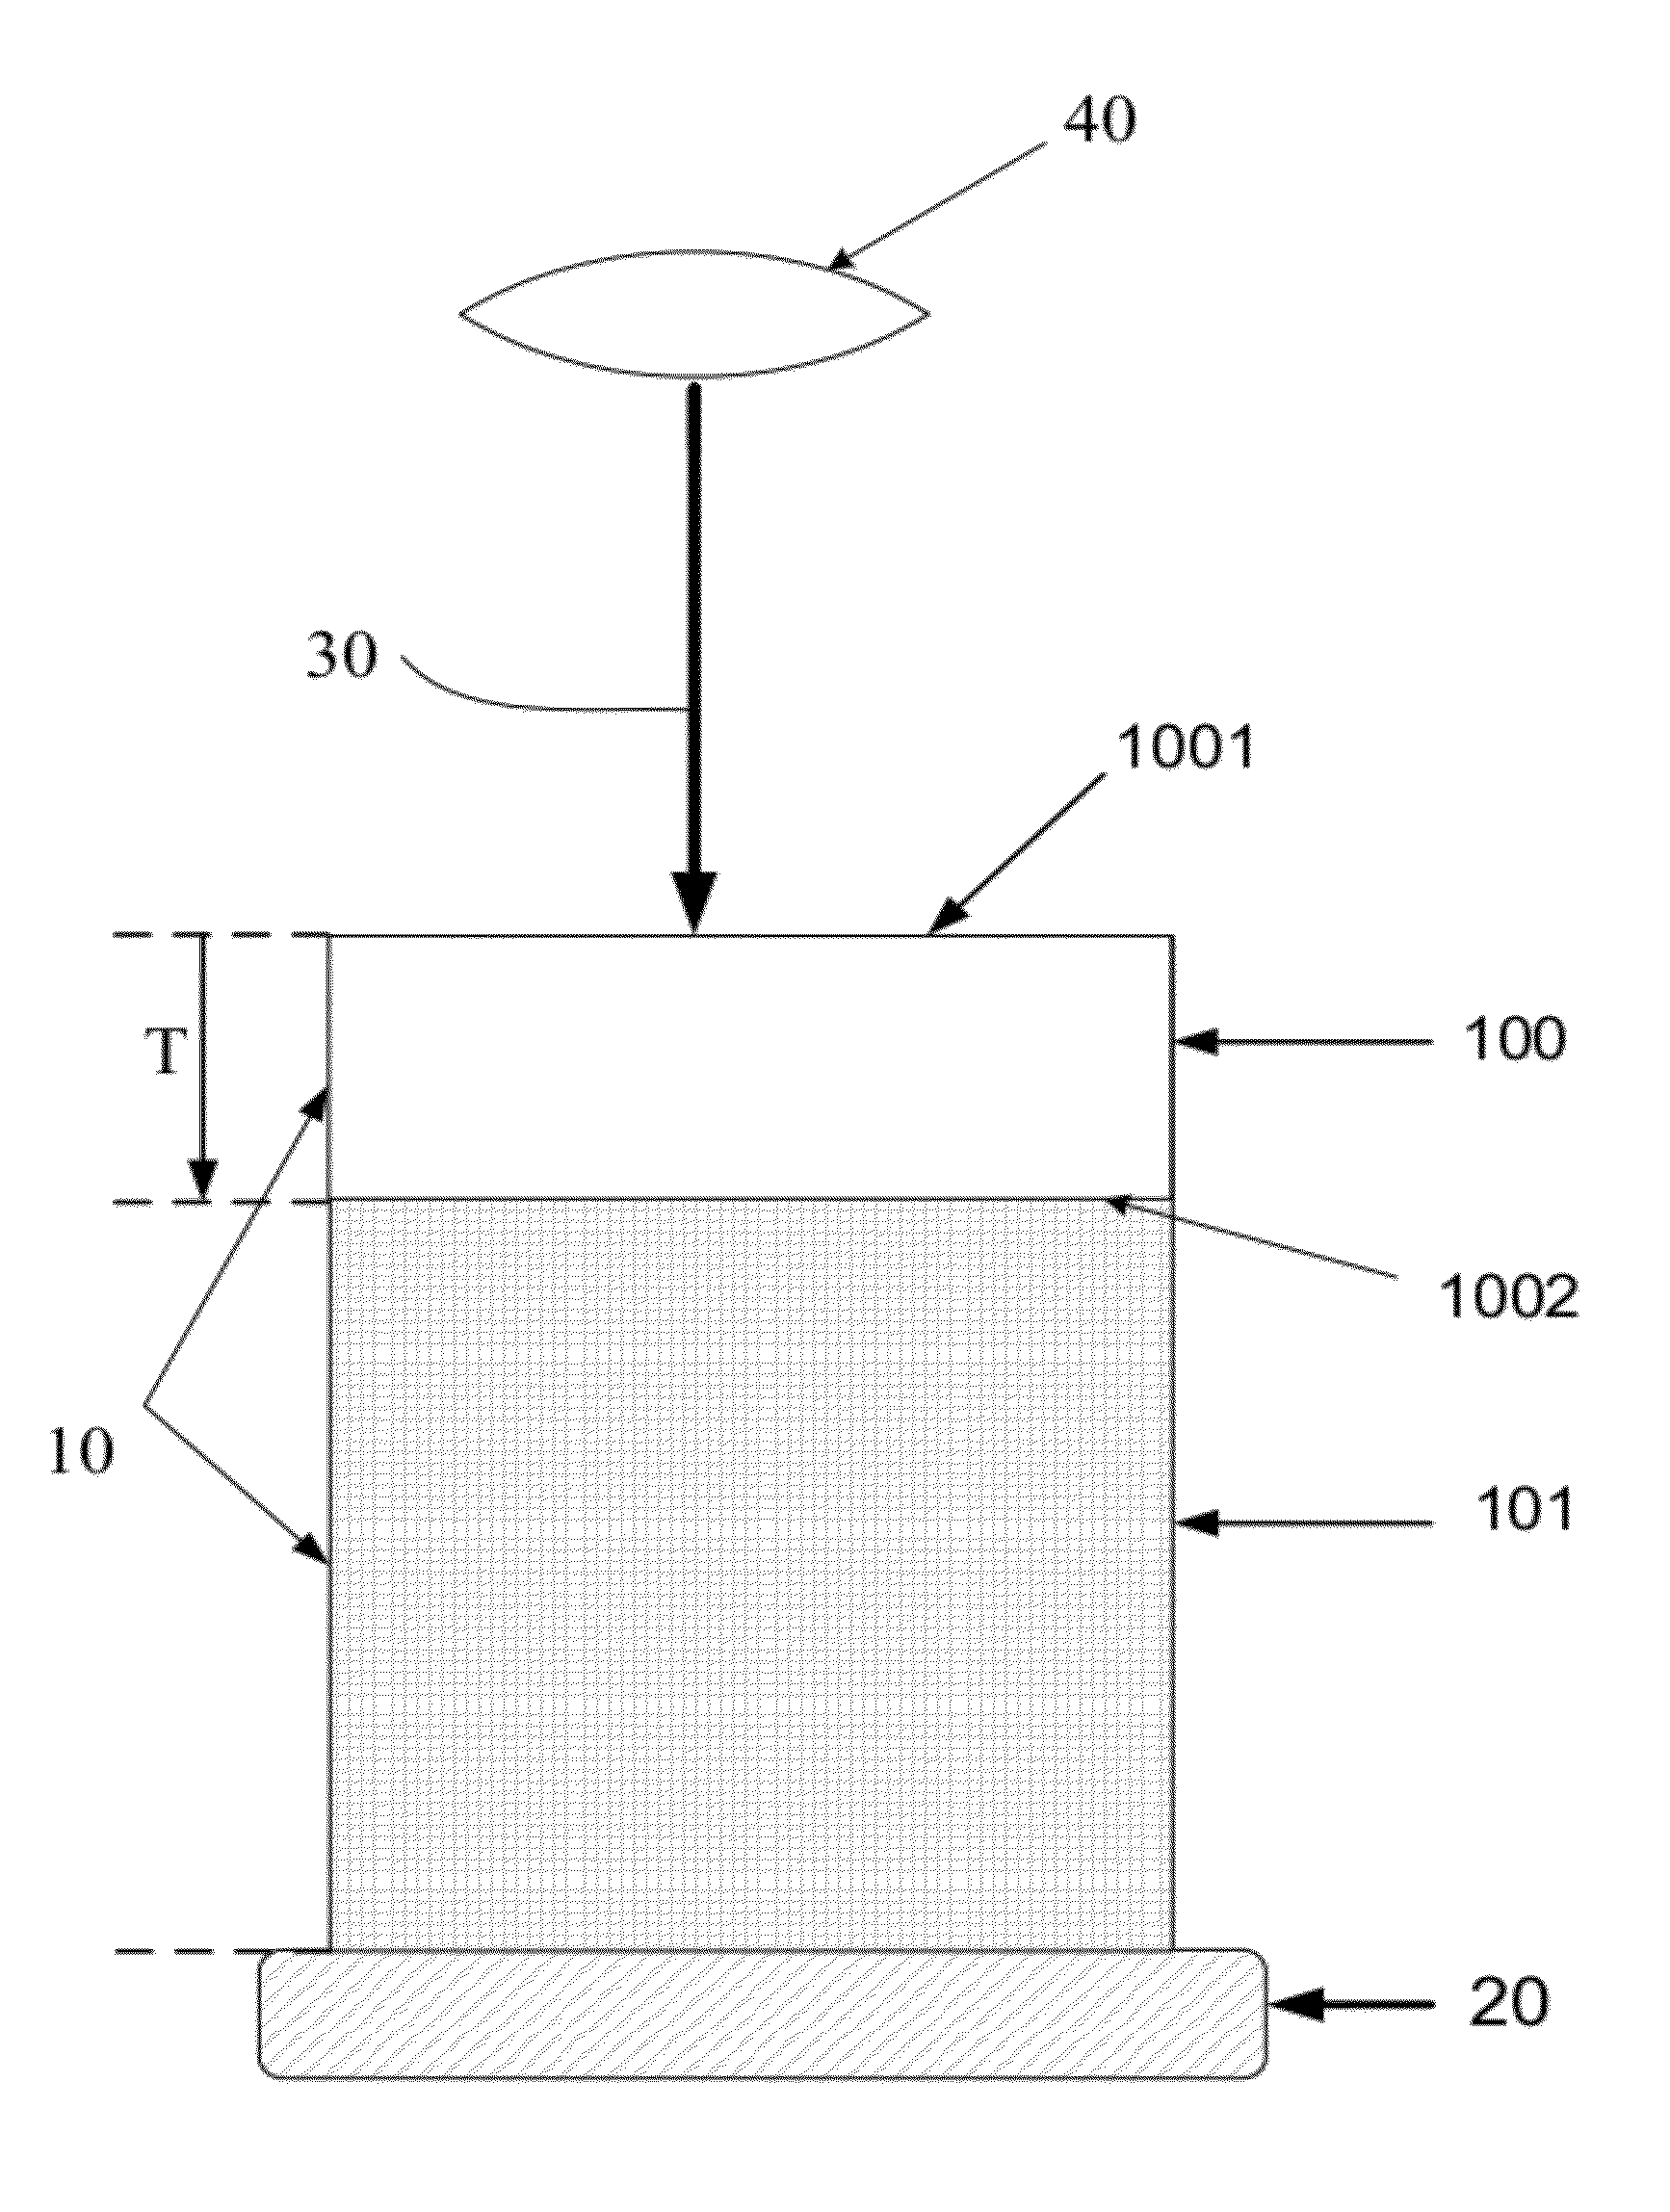 Method for 3-dimensional microscopic visualization of thick biological tissues